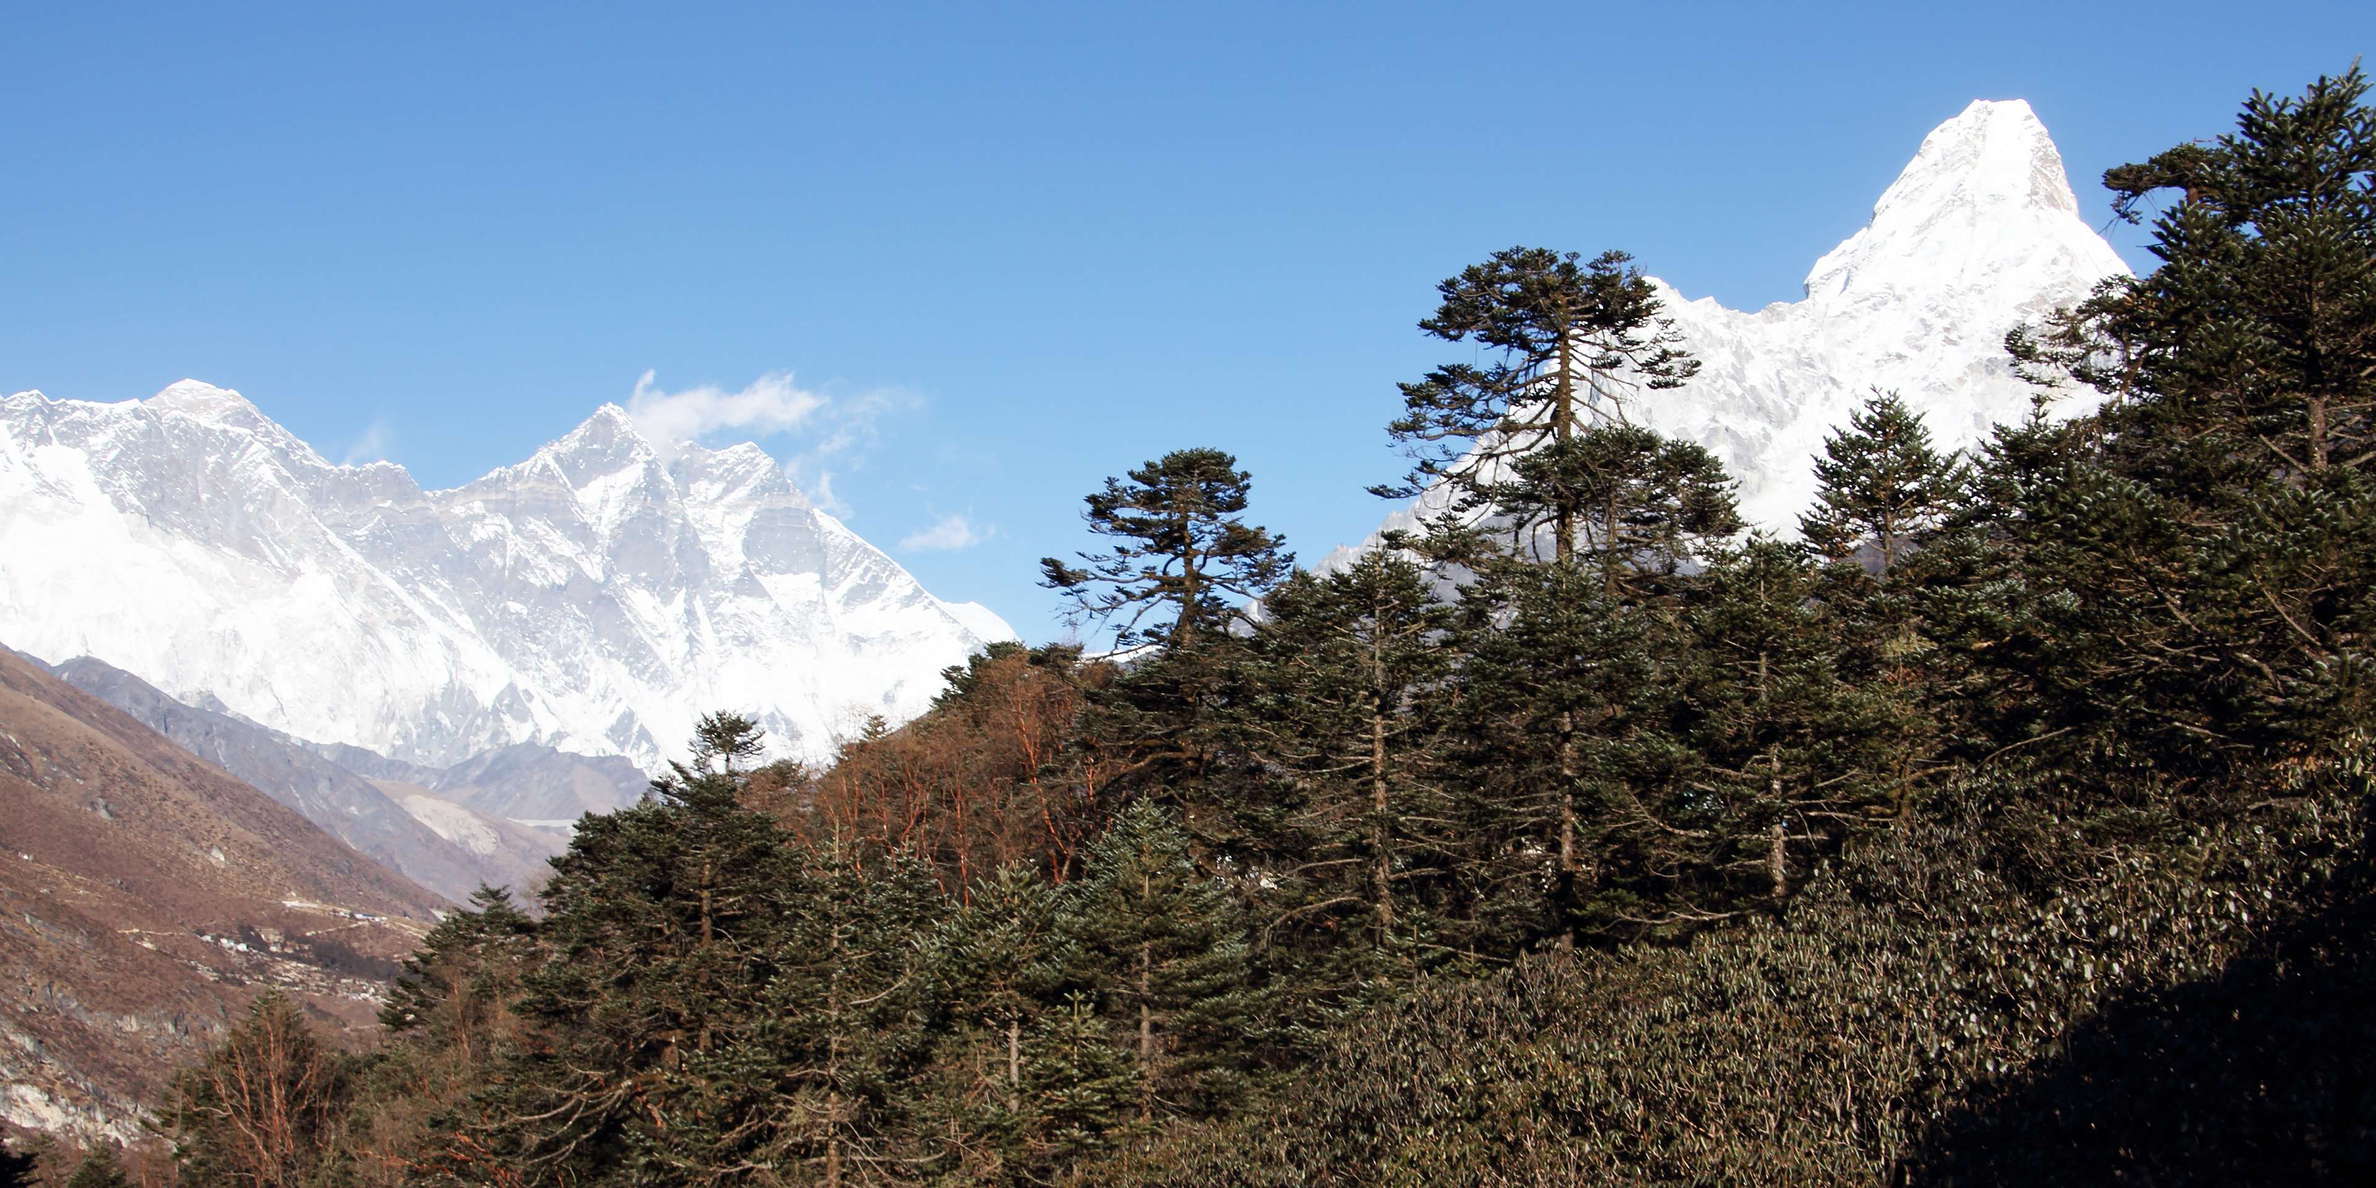 Tengboche  |  Mountain forest with rhododendron